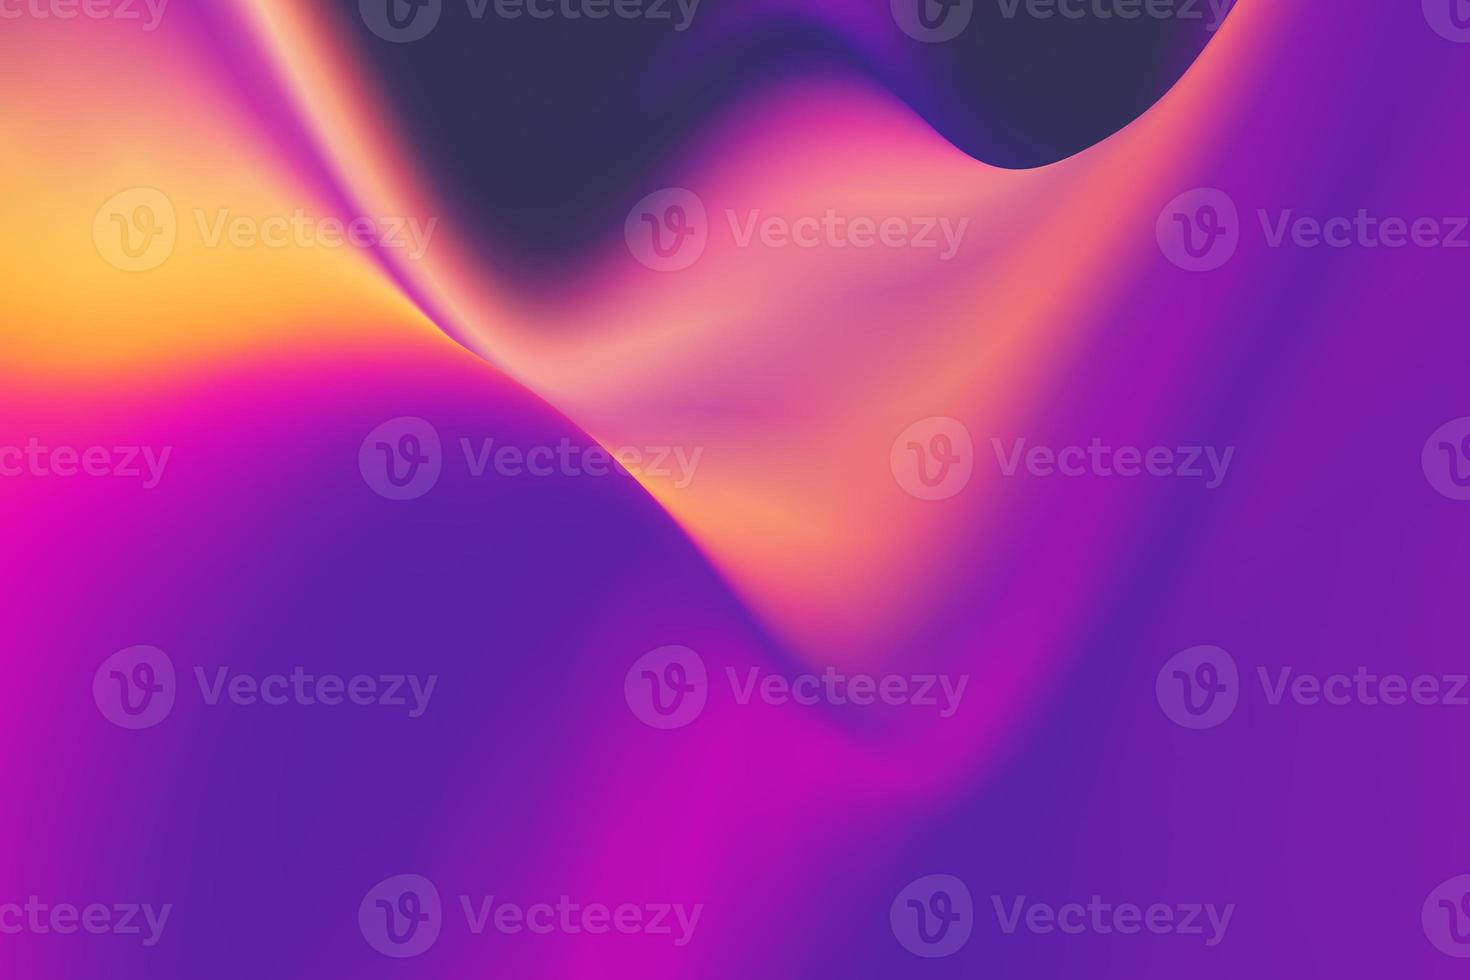 Ultraviolet fluid 3d render background. Trendy abstract futuristic neon surfaces. Colorful liquid shape a vivid backdrop photo